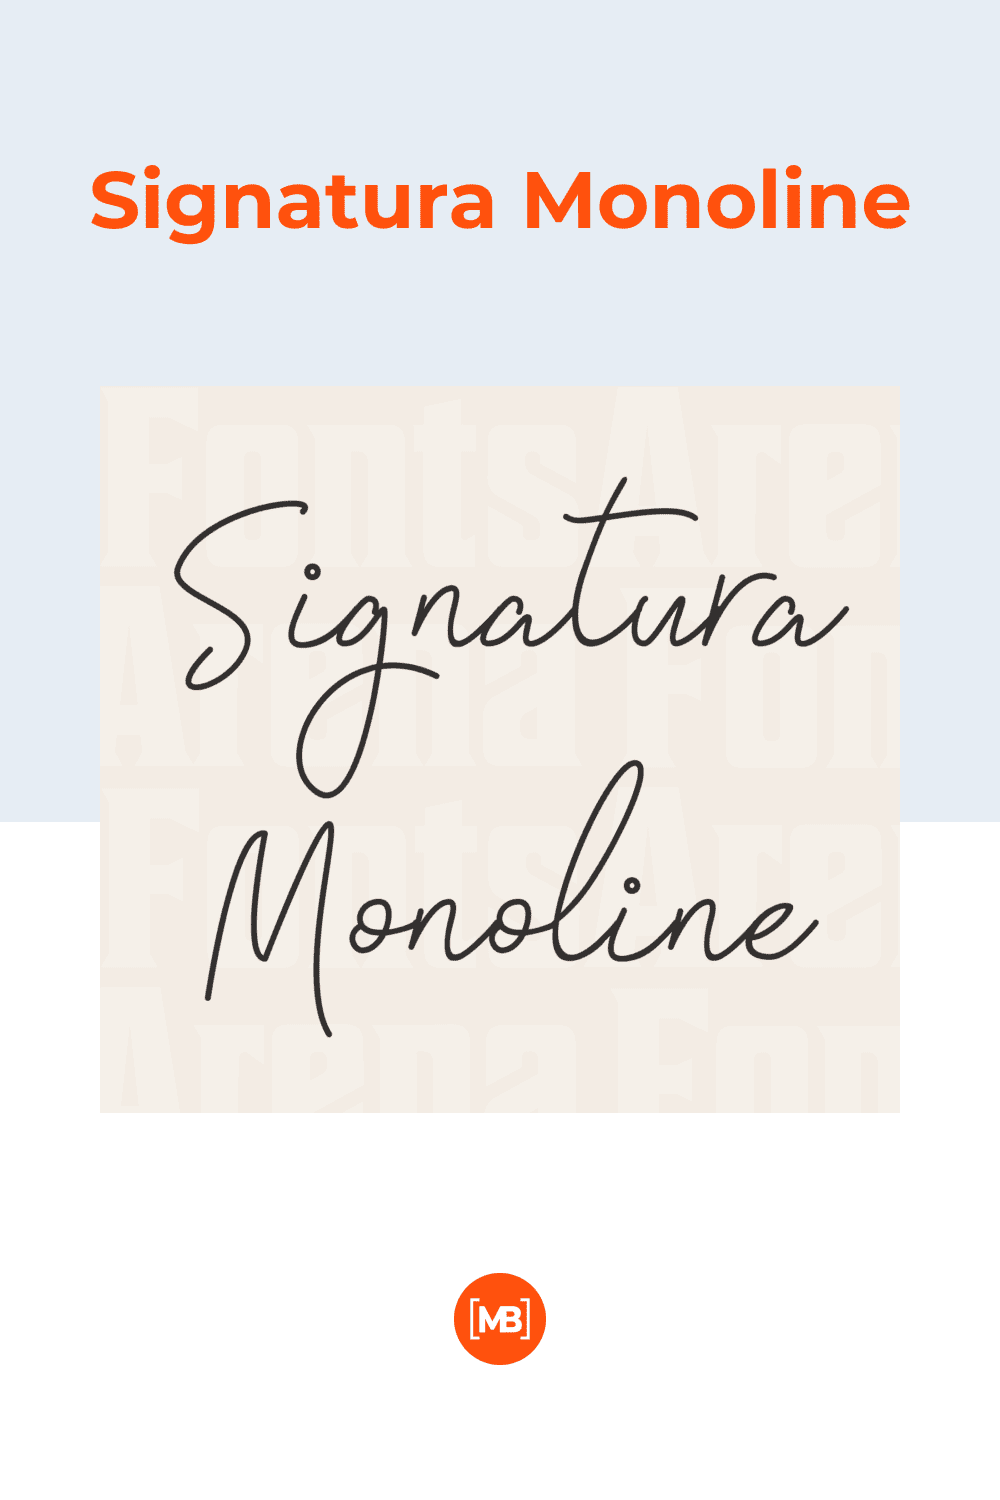 This is a modern calligraphy script typeface, ideal for signatures and monograms, as well as branding, stationery, headlines or banners.